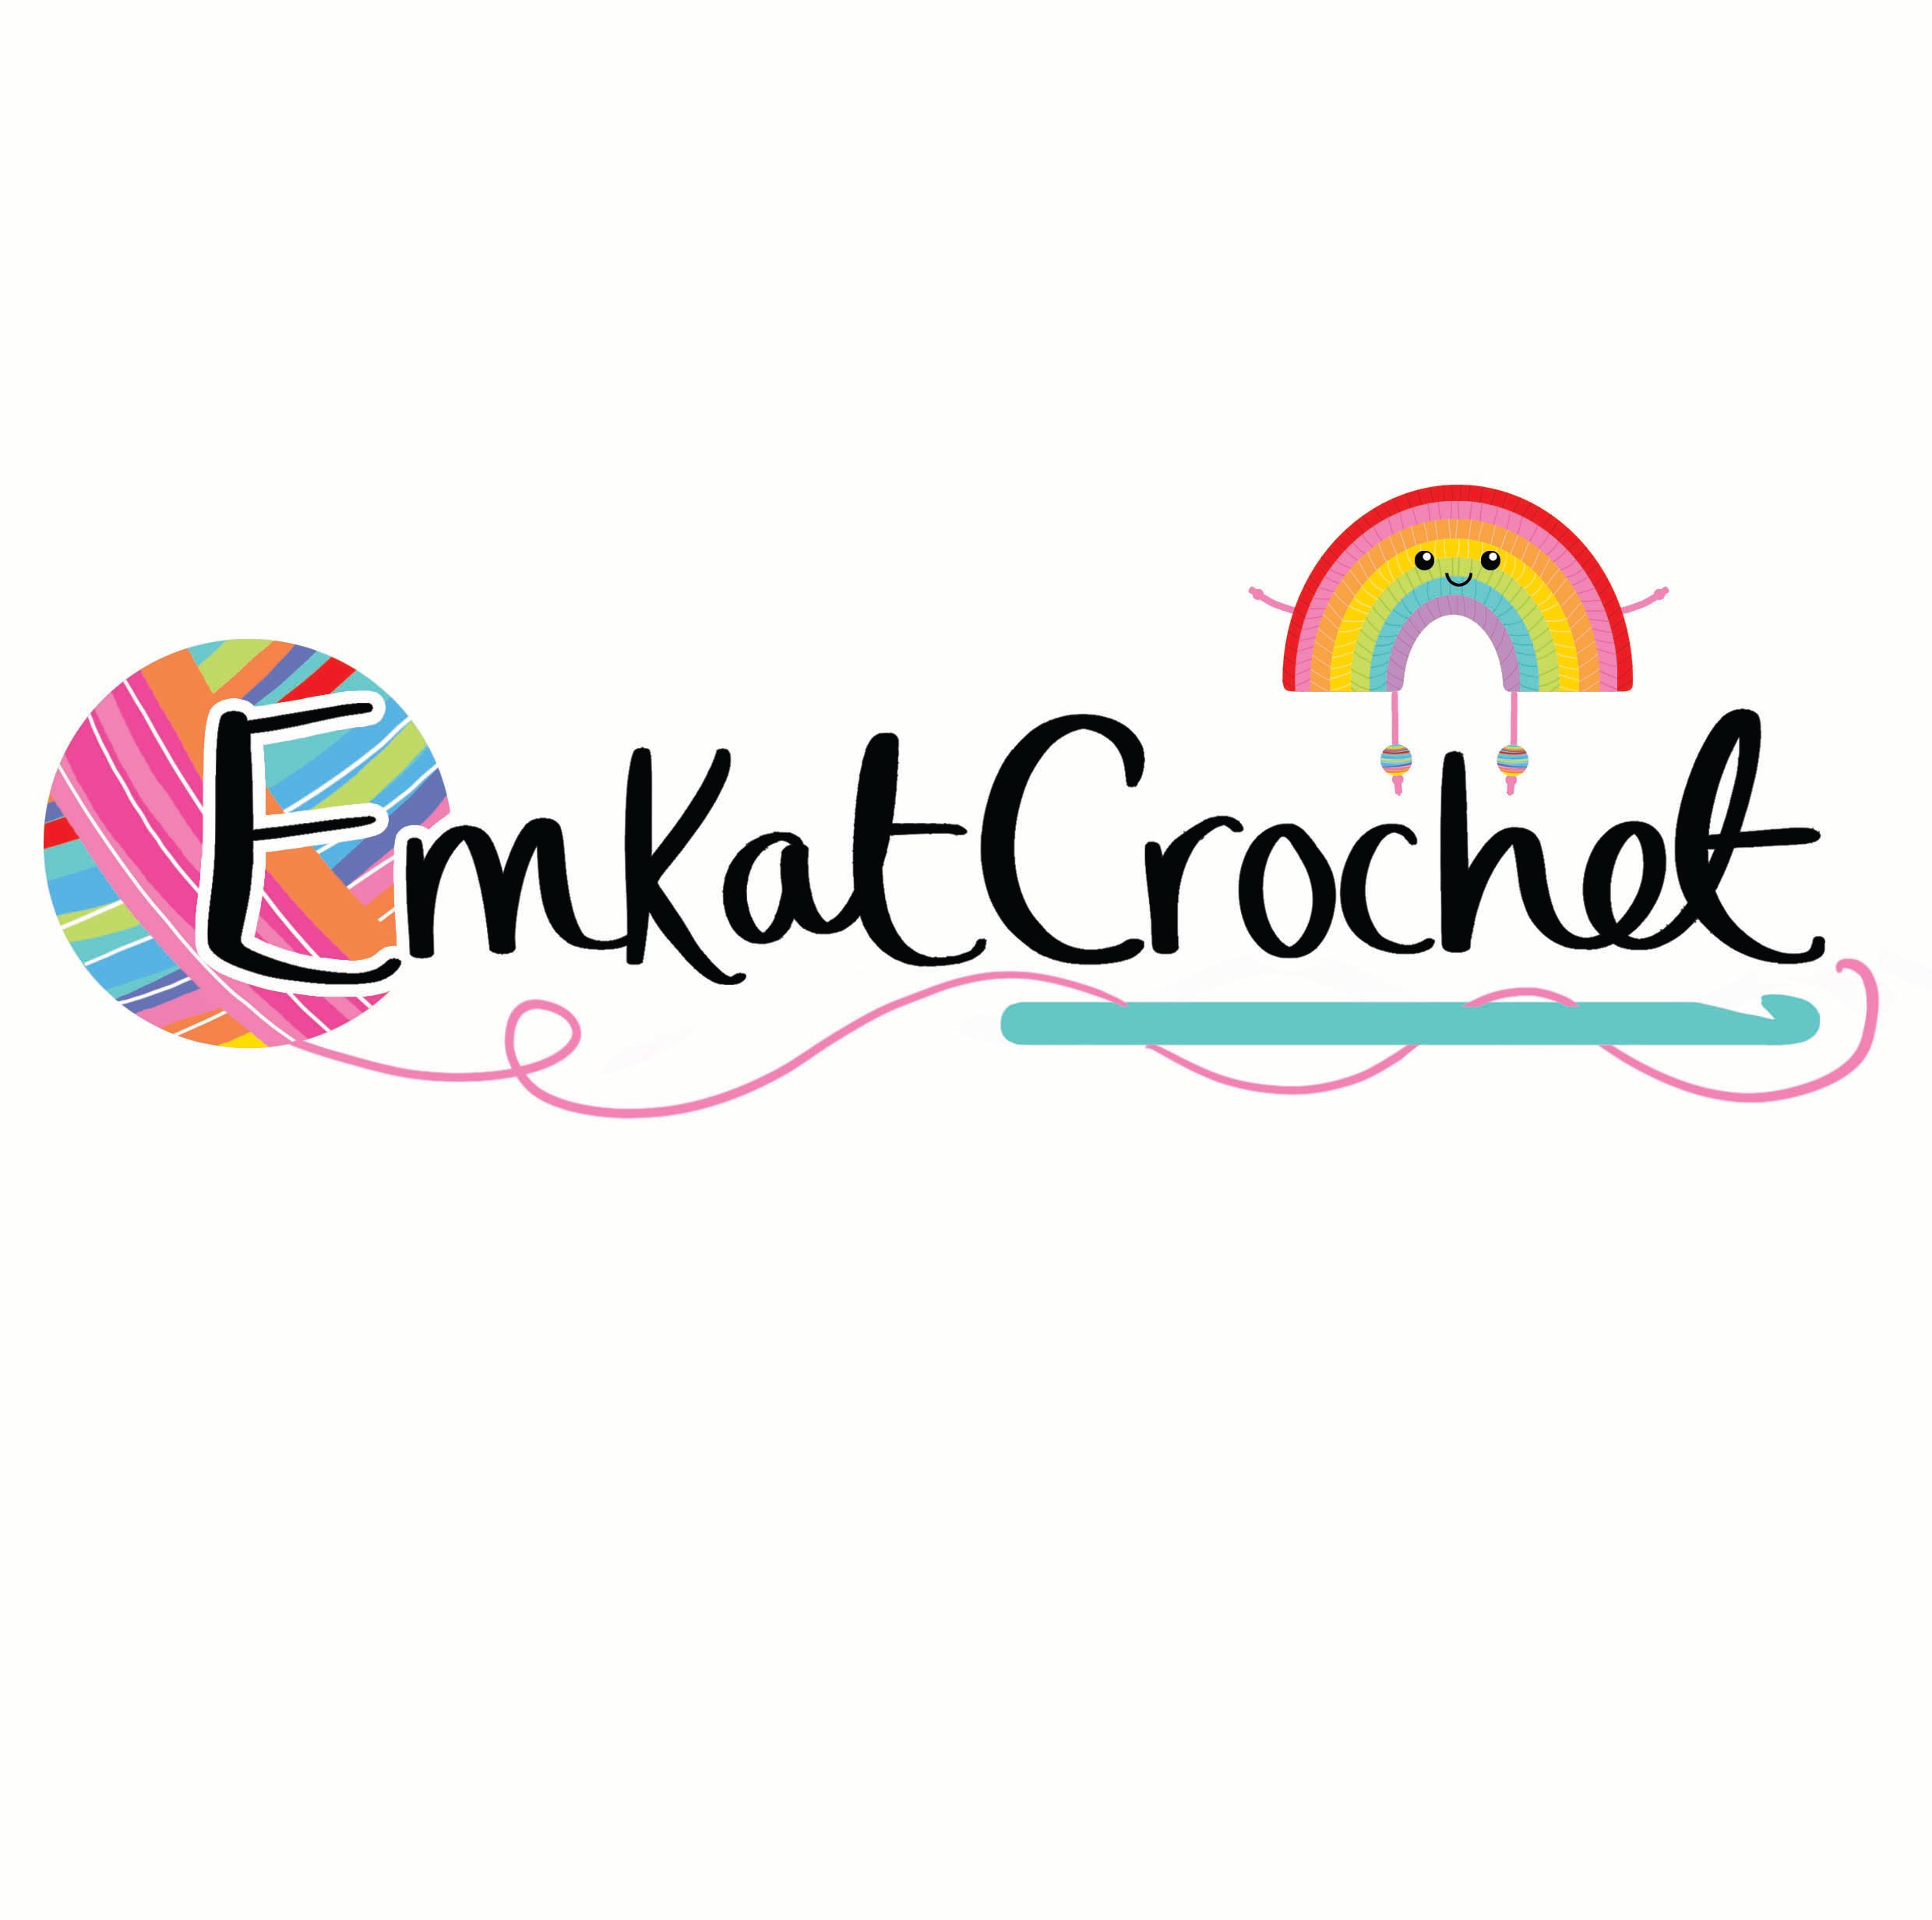 Welcome to #Emkatcrochet!! The home of #handmade #crocheted items by me :-)
I started learning to #crochet in October 2016 and haven't put my hook down since!!